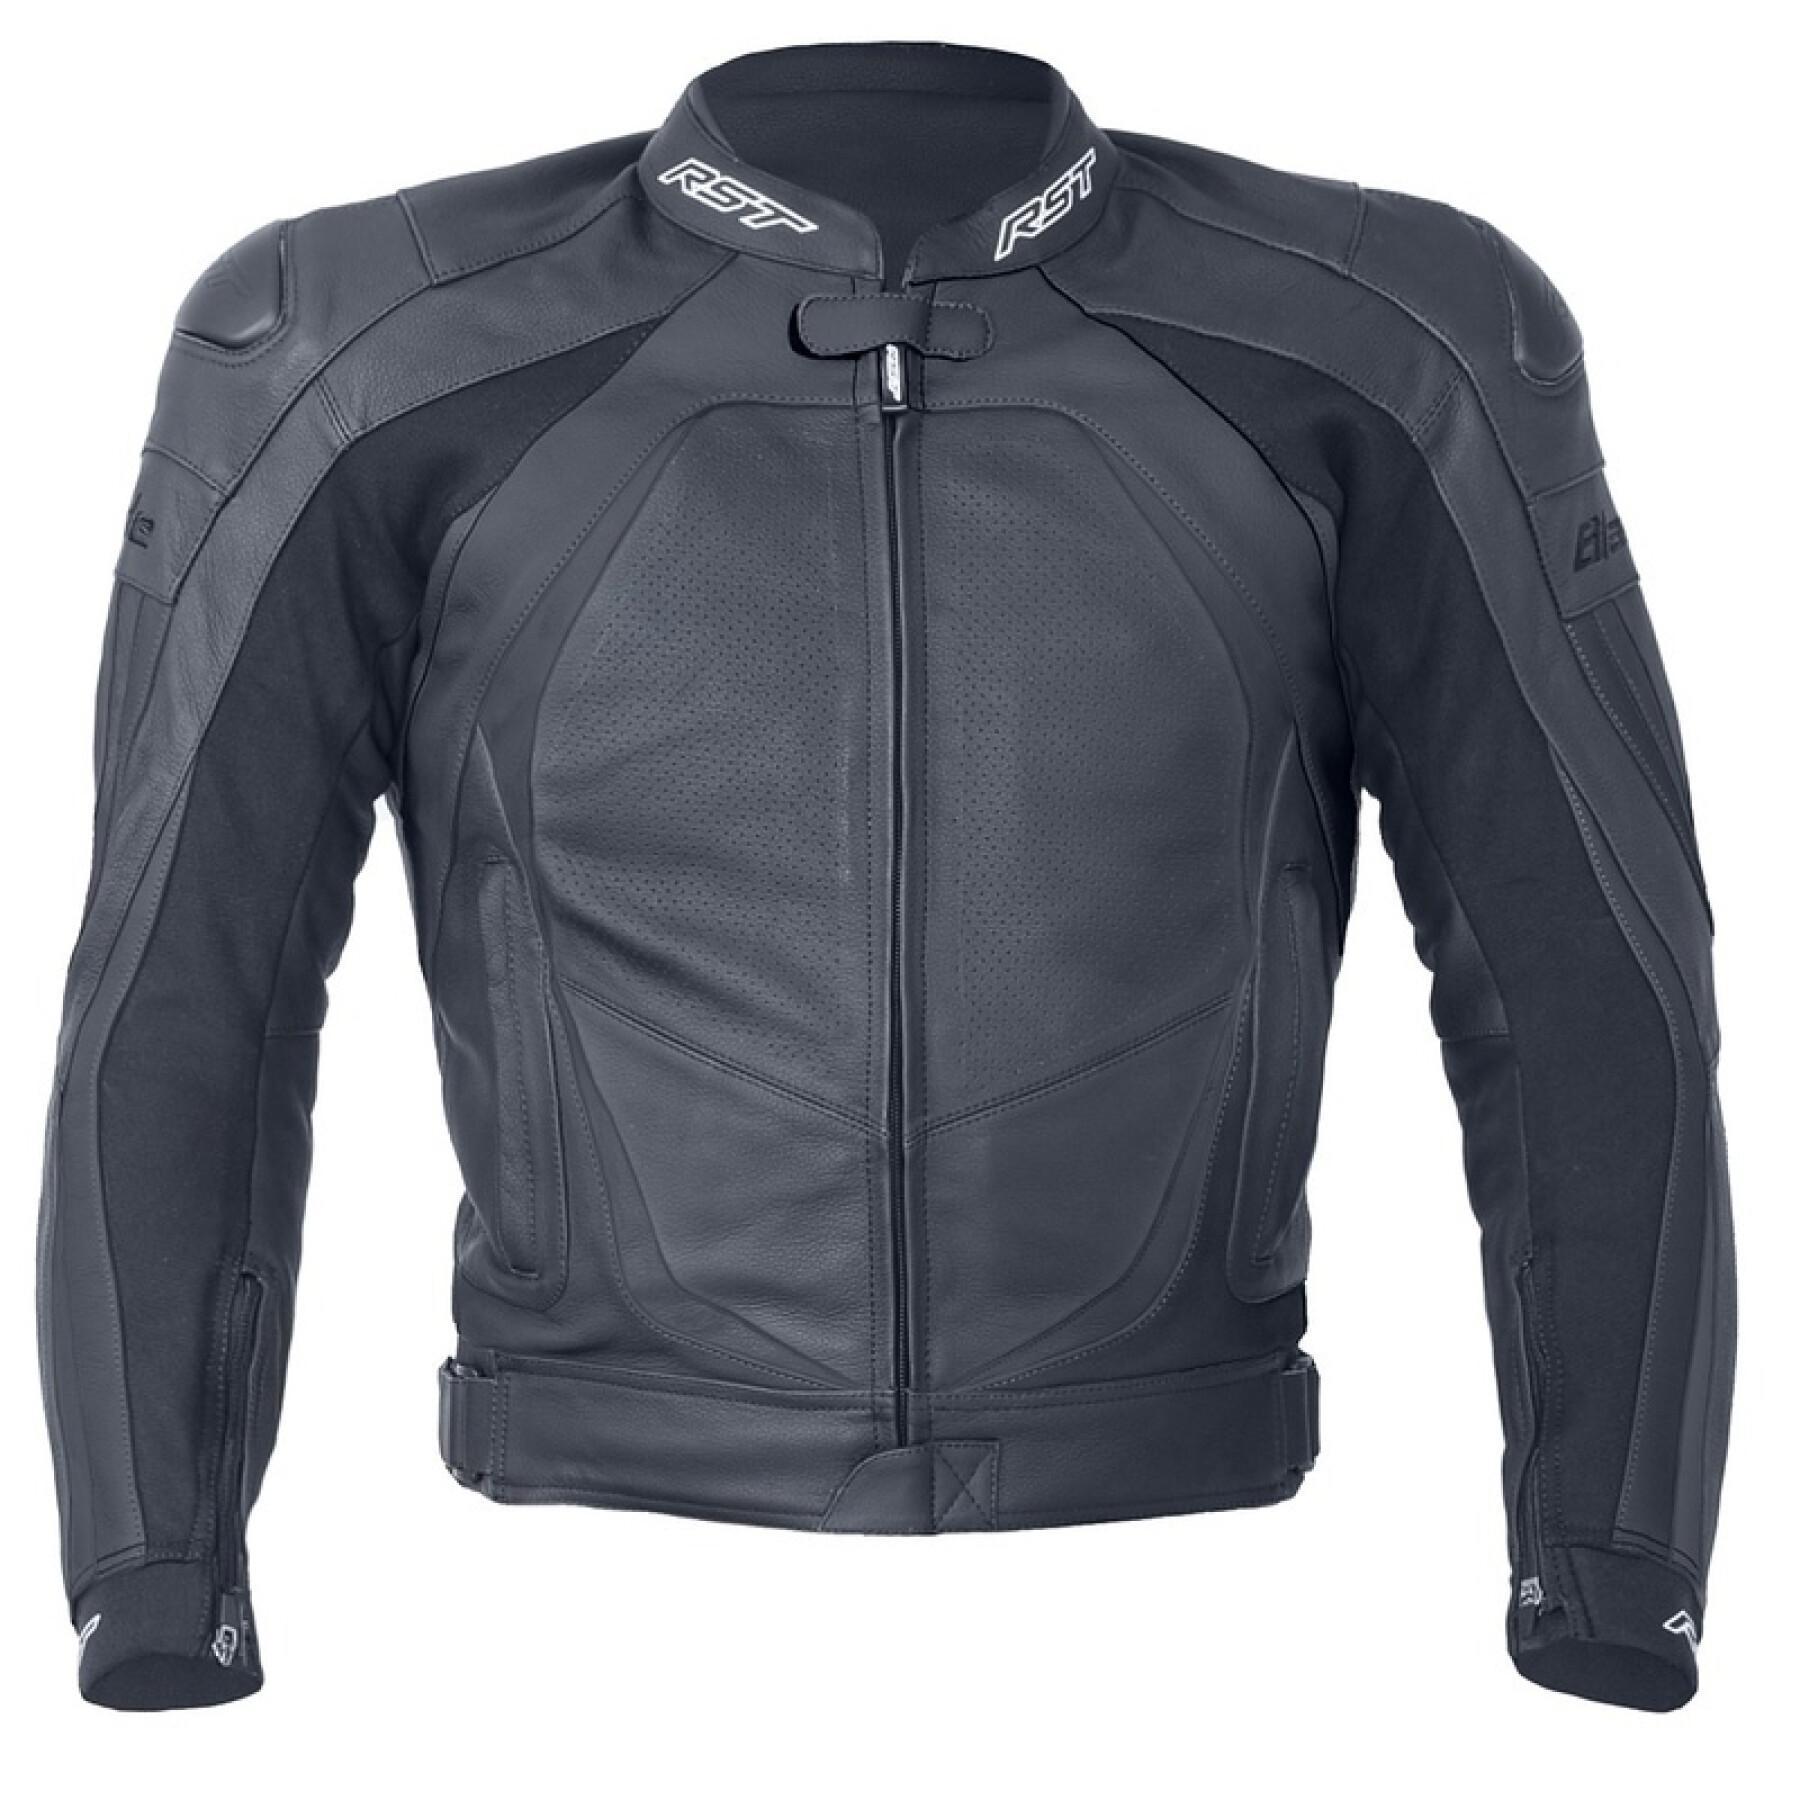 Leather motorcycle jacket for women RST Blade Sport II